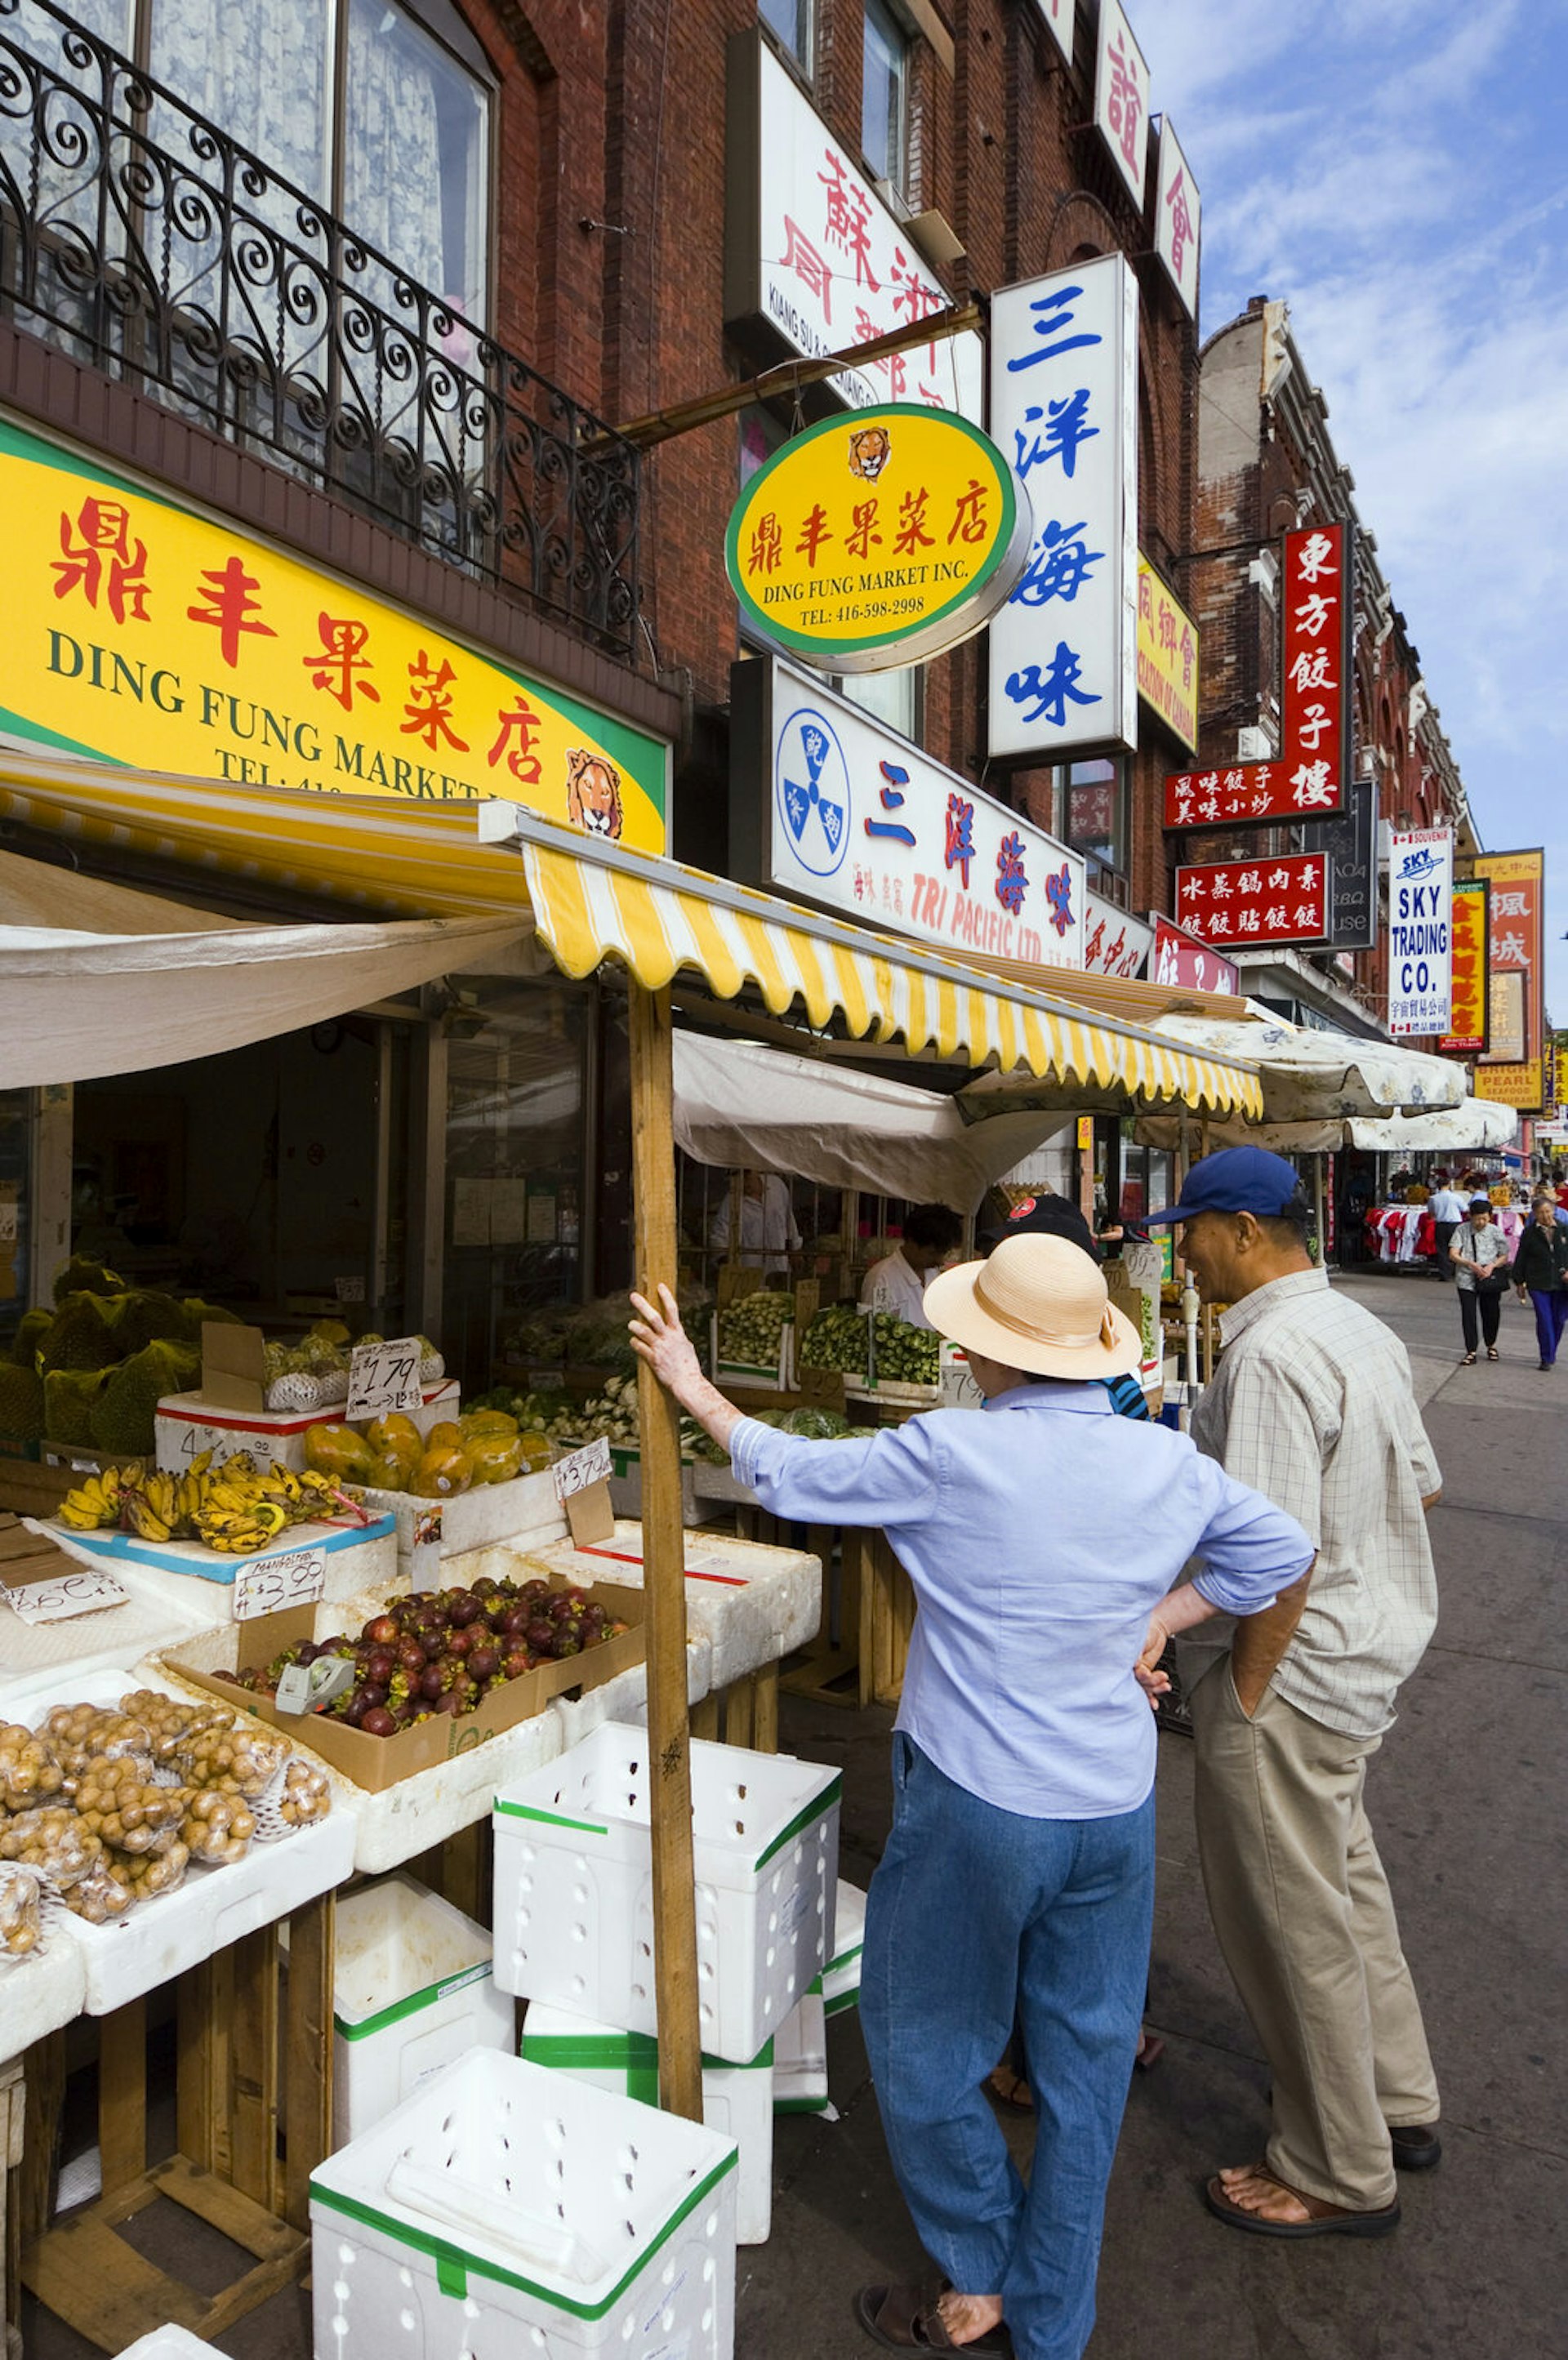 A brightly colored food stand in Toronto, Ontario's chinatown greets two travelers. The signage all uses chinese characters.